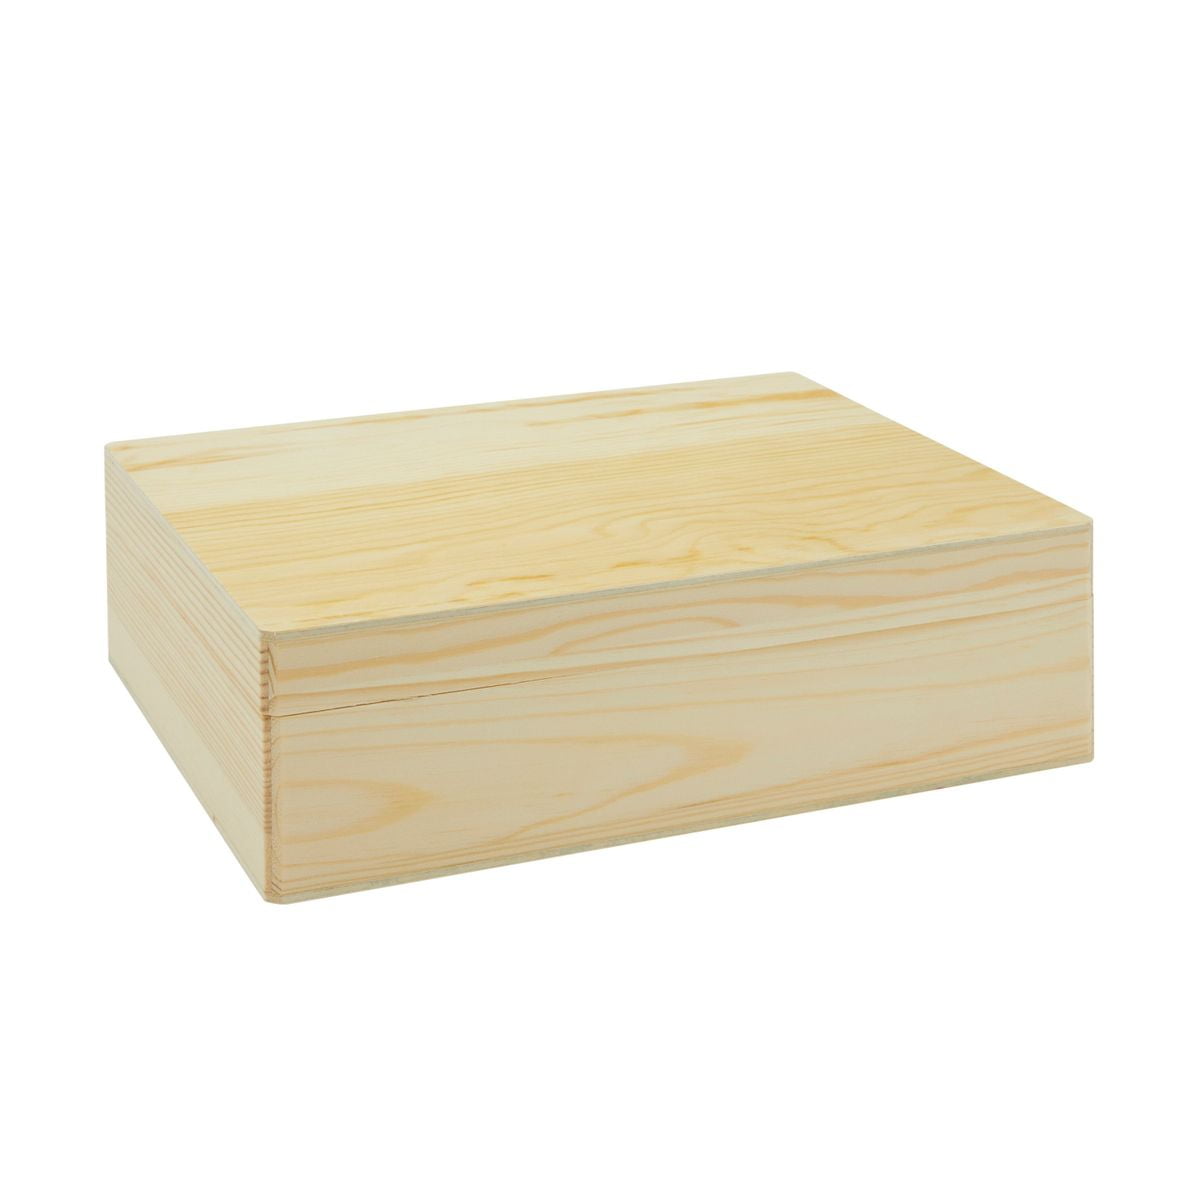 Plain Wooden Boxes 12 Comparments Chest Wooden Storage Jewellery Keepsake 12-BW 